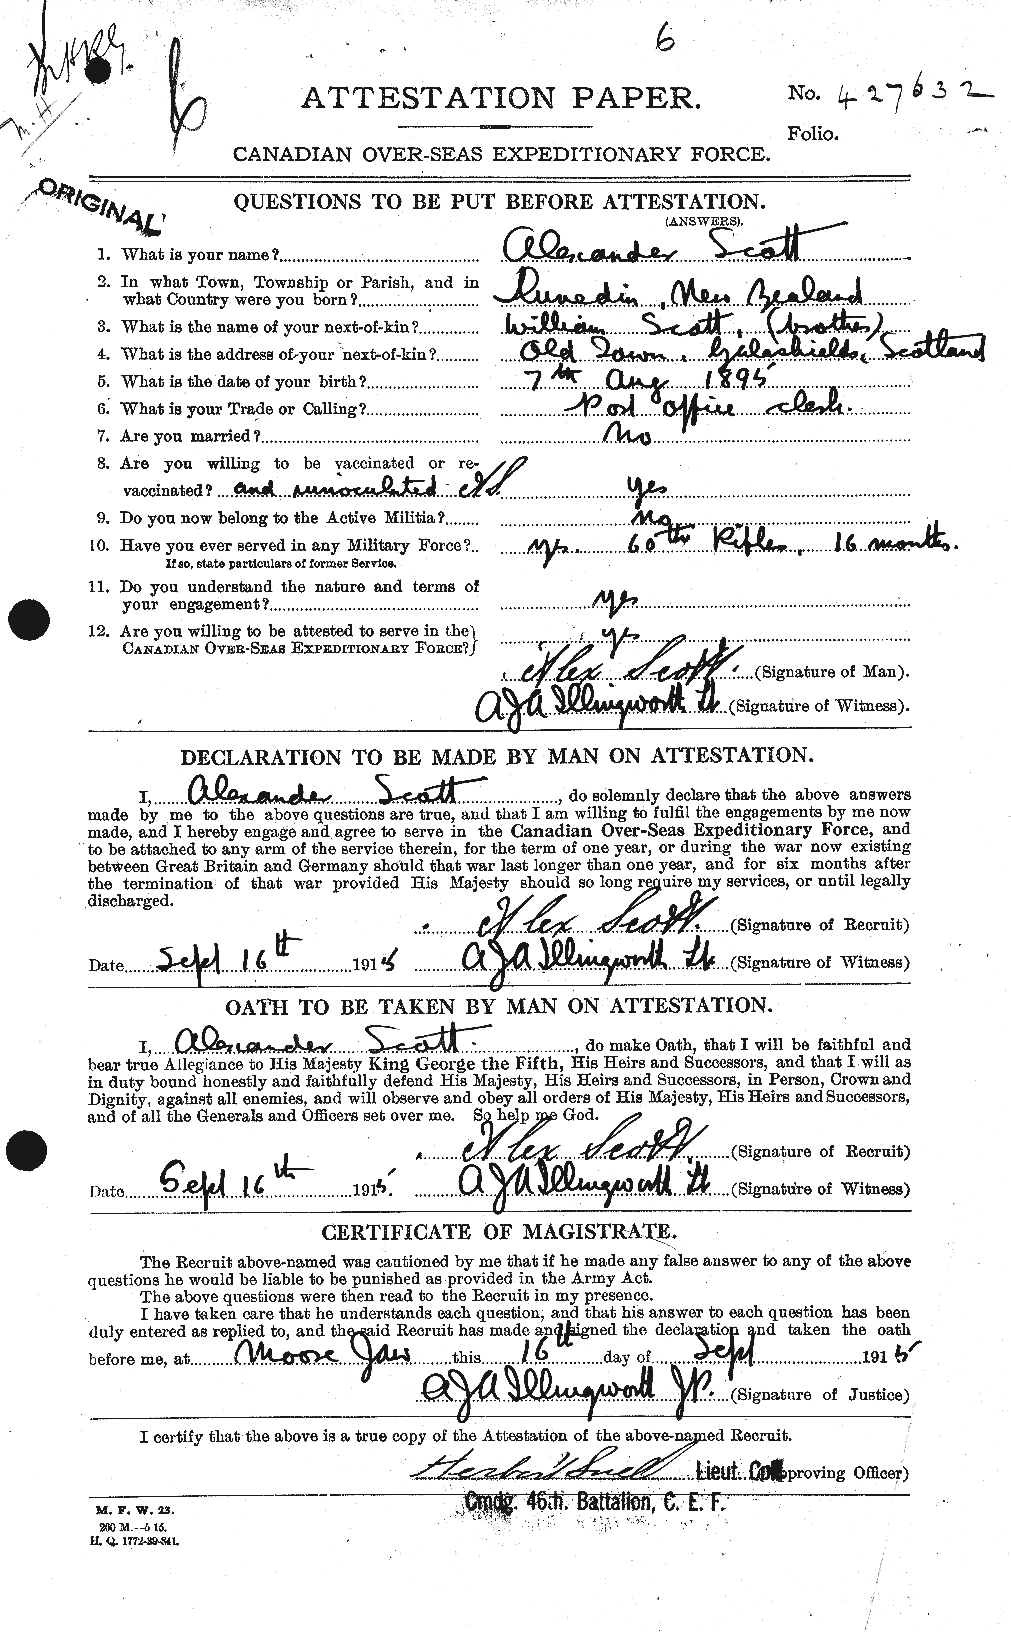 Personnel Records of the First World War - CEF 086613a